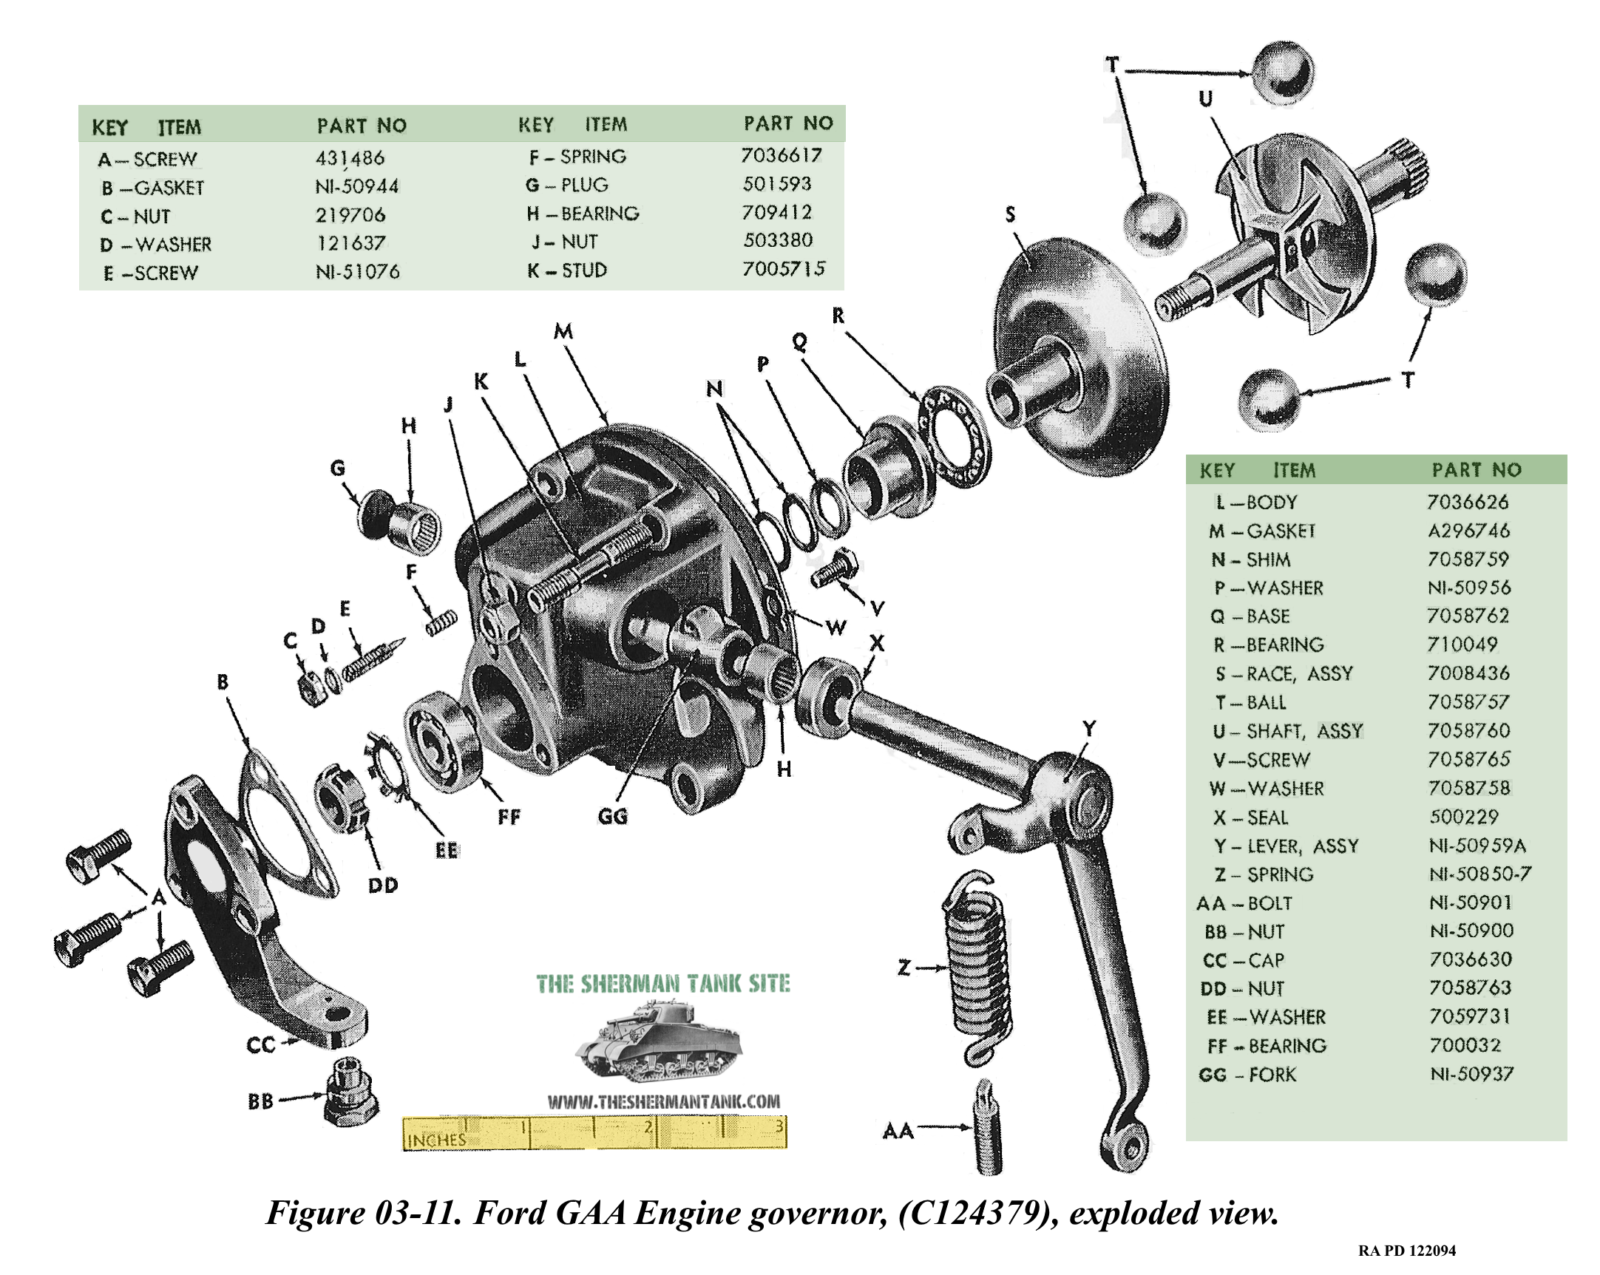 Engine-governor-exploded-view-c124379-im